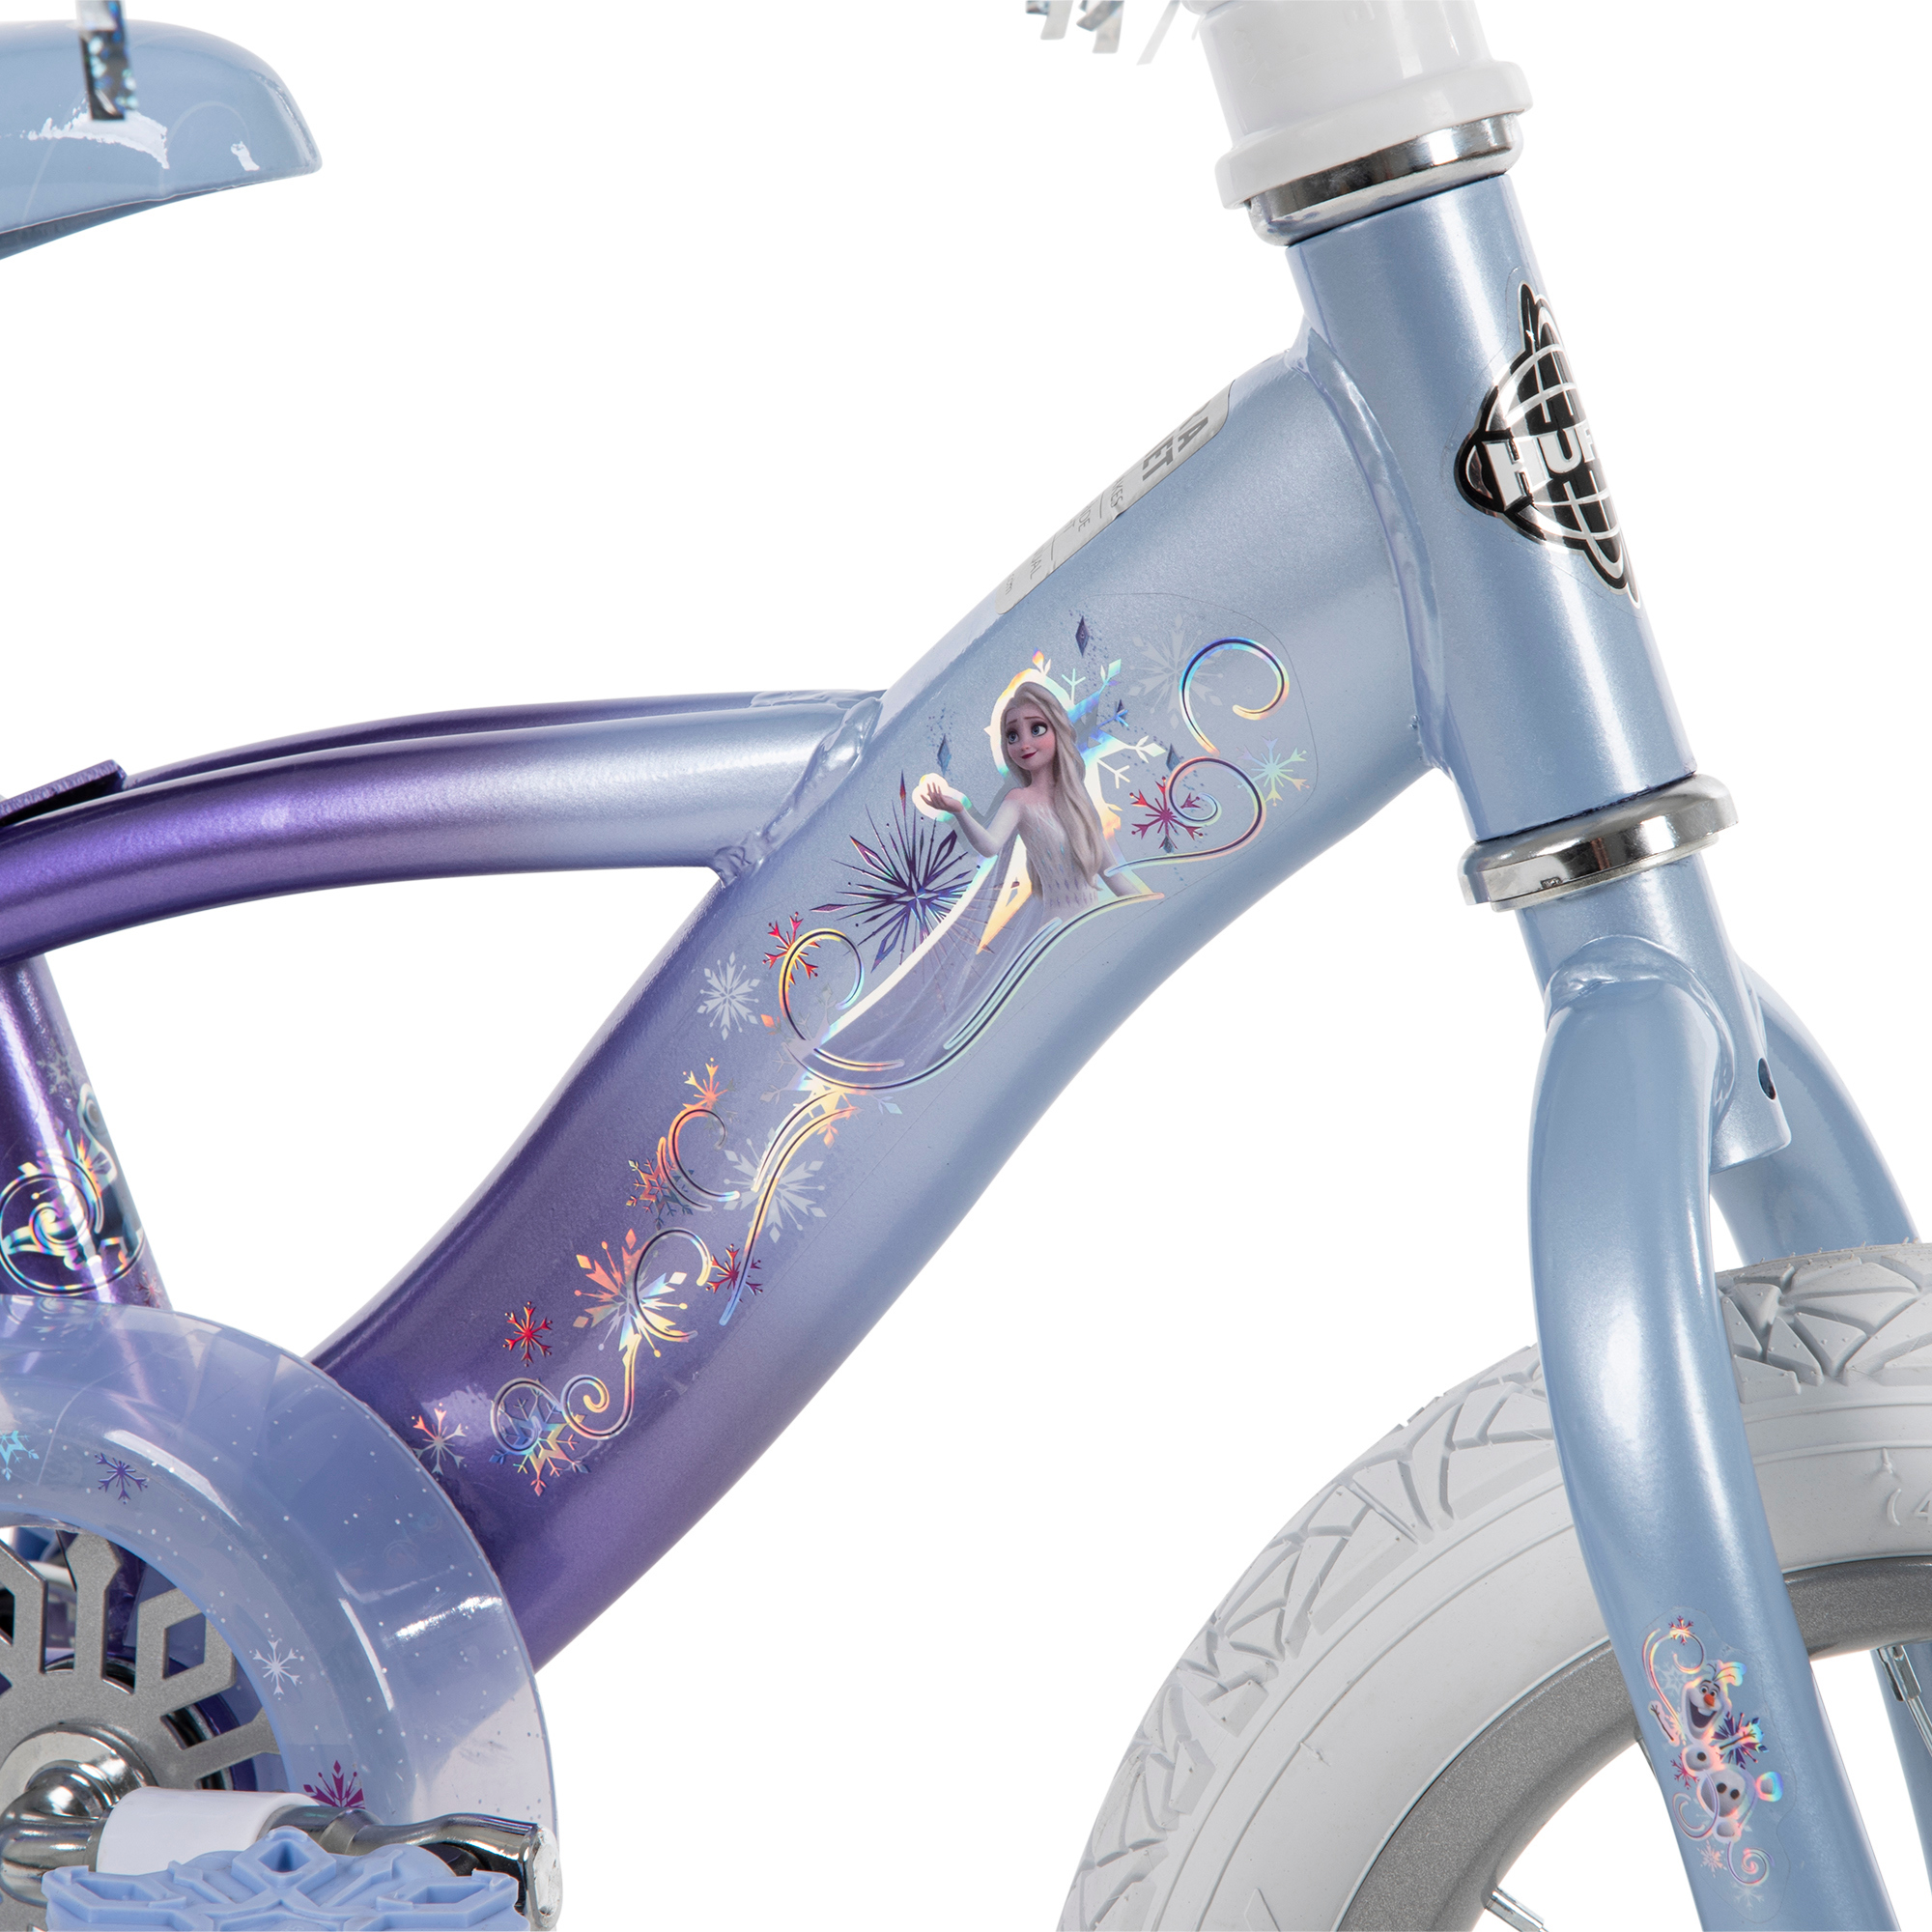 Disney Frozen 12 in. Bike with Doll Carrier Sleigh for Girl's, Ages 2+ Years, White and Purple by Huffy - image 8 of 19